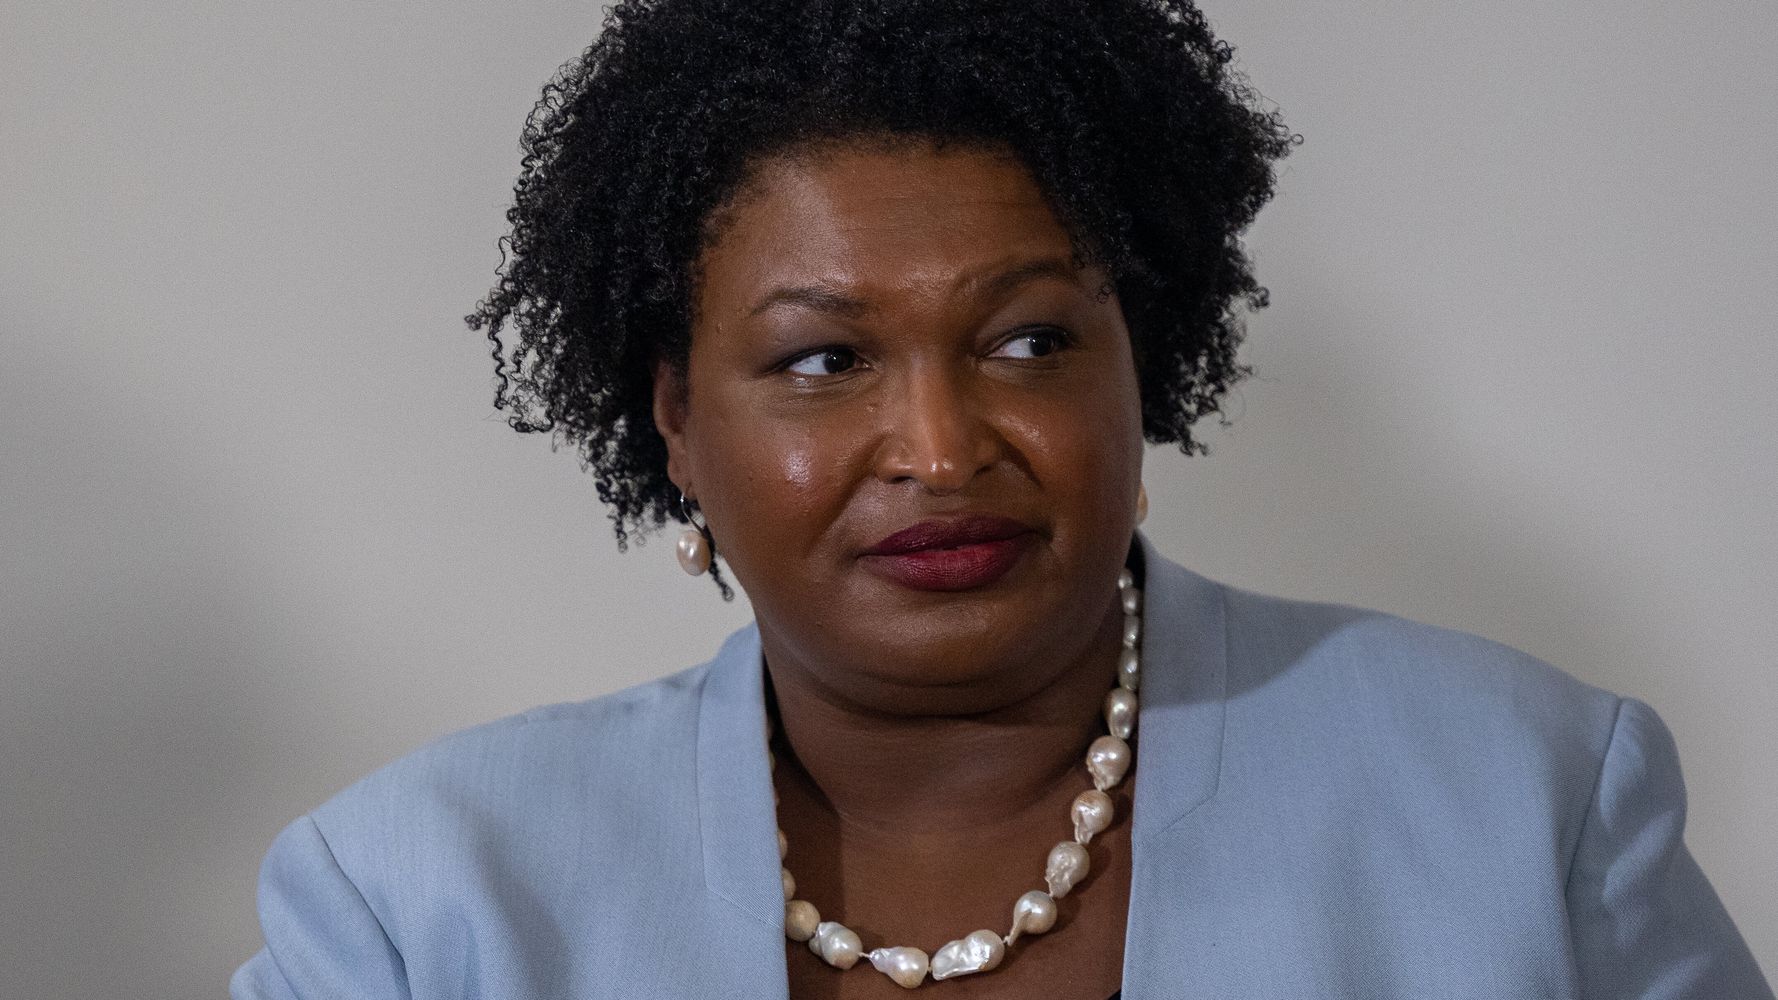 Stacey Abrams Explains Change Of Heart On Abortion